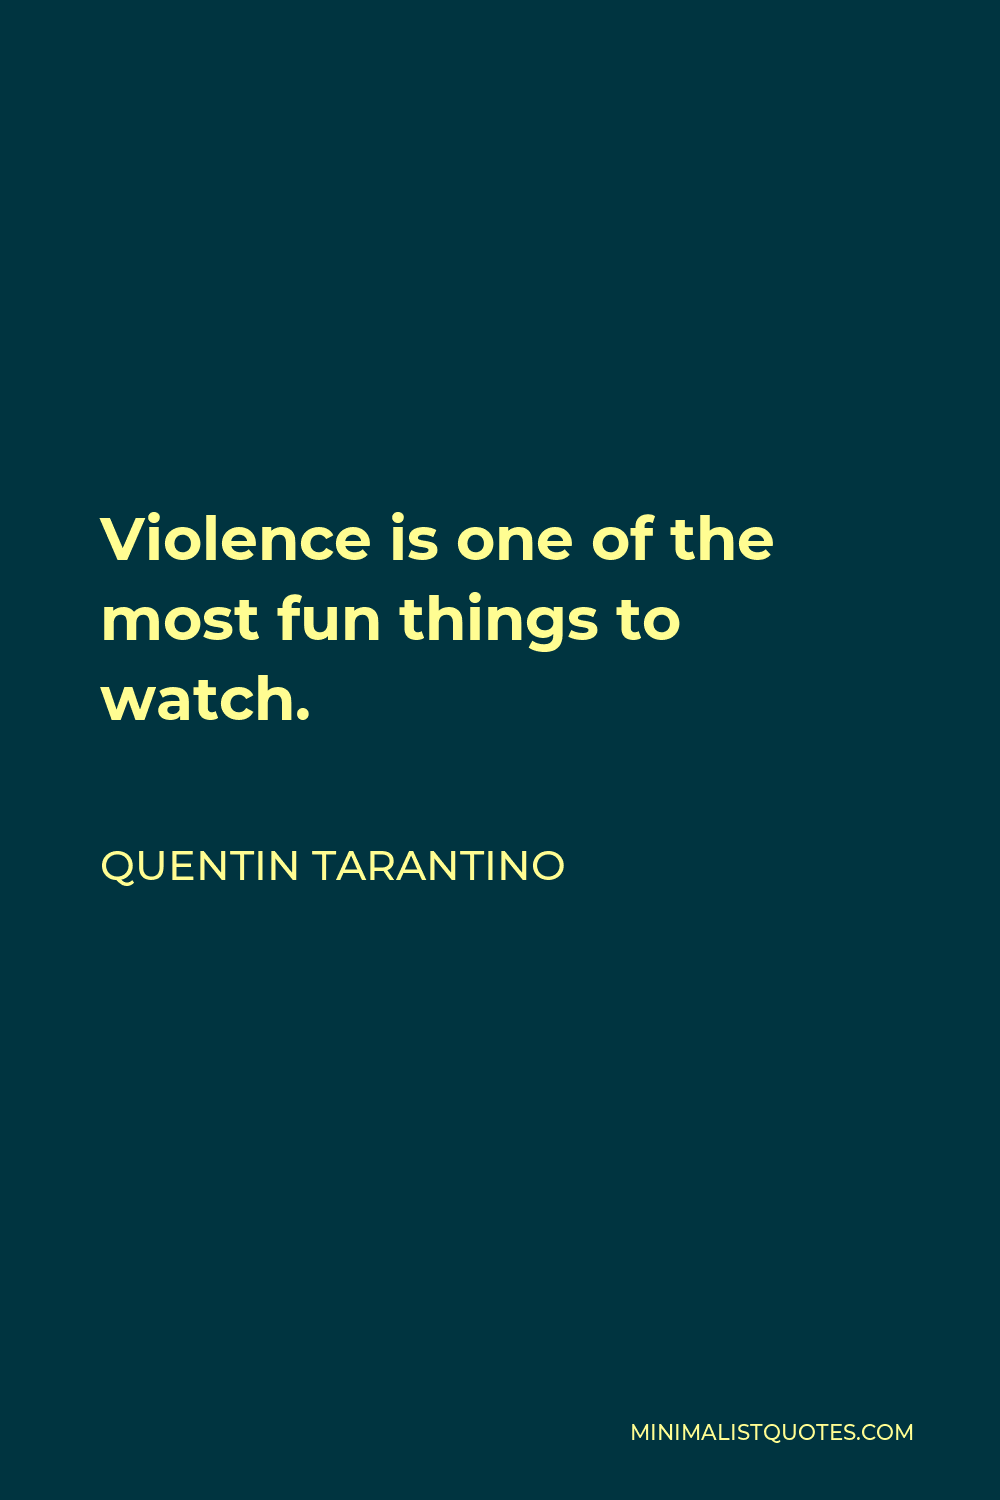 Quentin Tarantino Quote - Violence is one of the most fun things to watch.